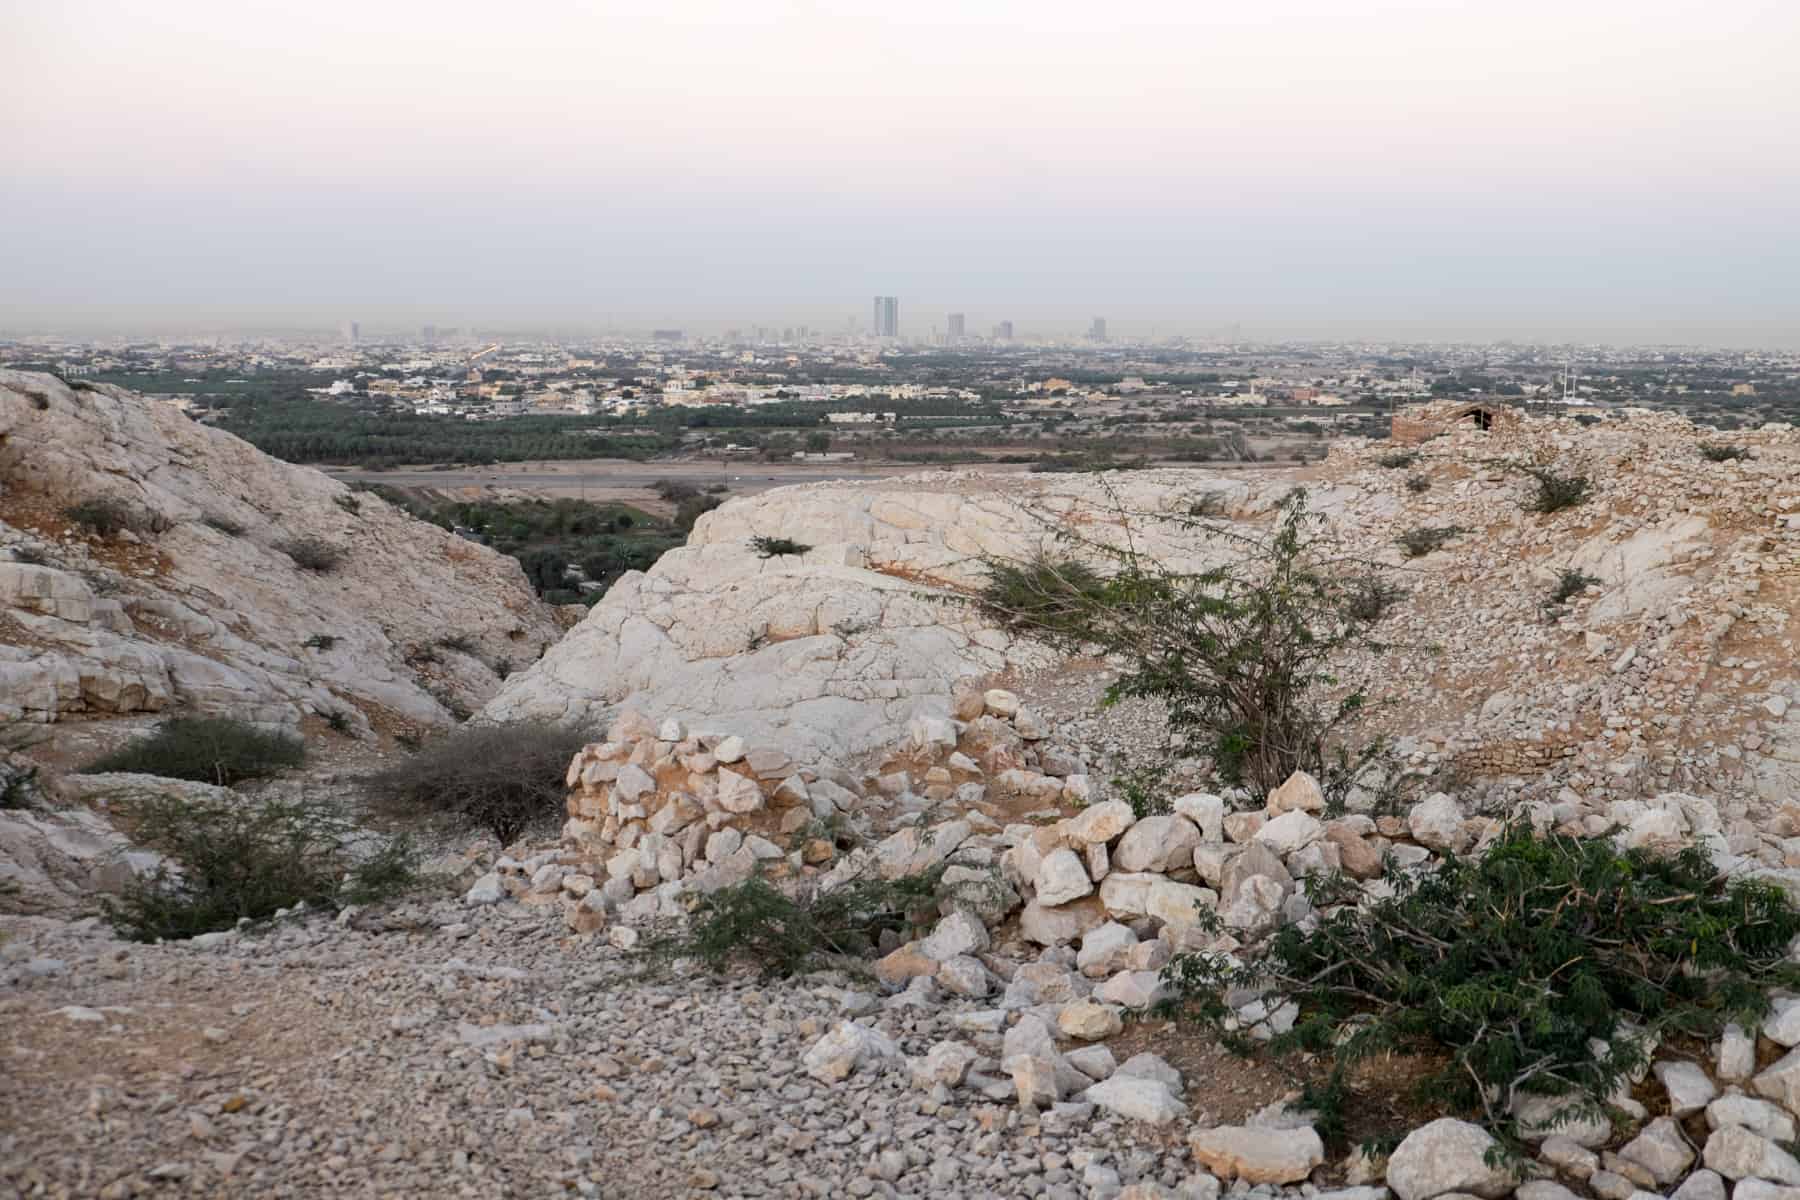 Mounds of smooth white stones and pebbles on a hilltop - the ruins of Sheba's Palace - overlook the modern skyline of Ras Al Khaimah city in the background